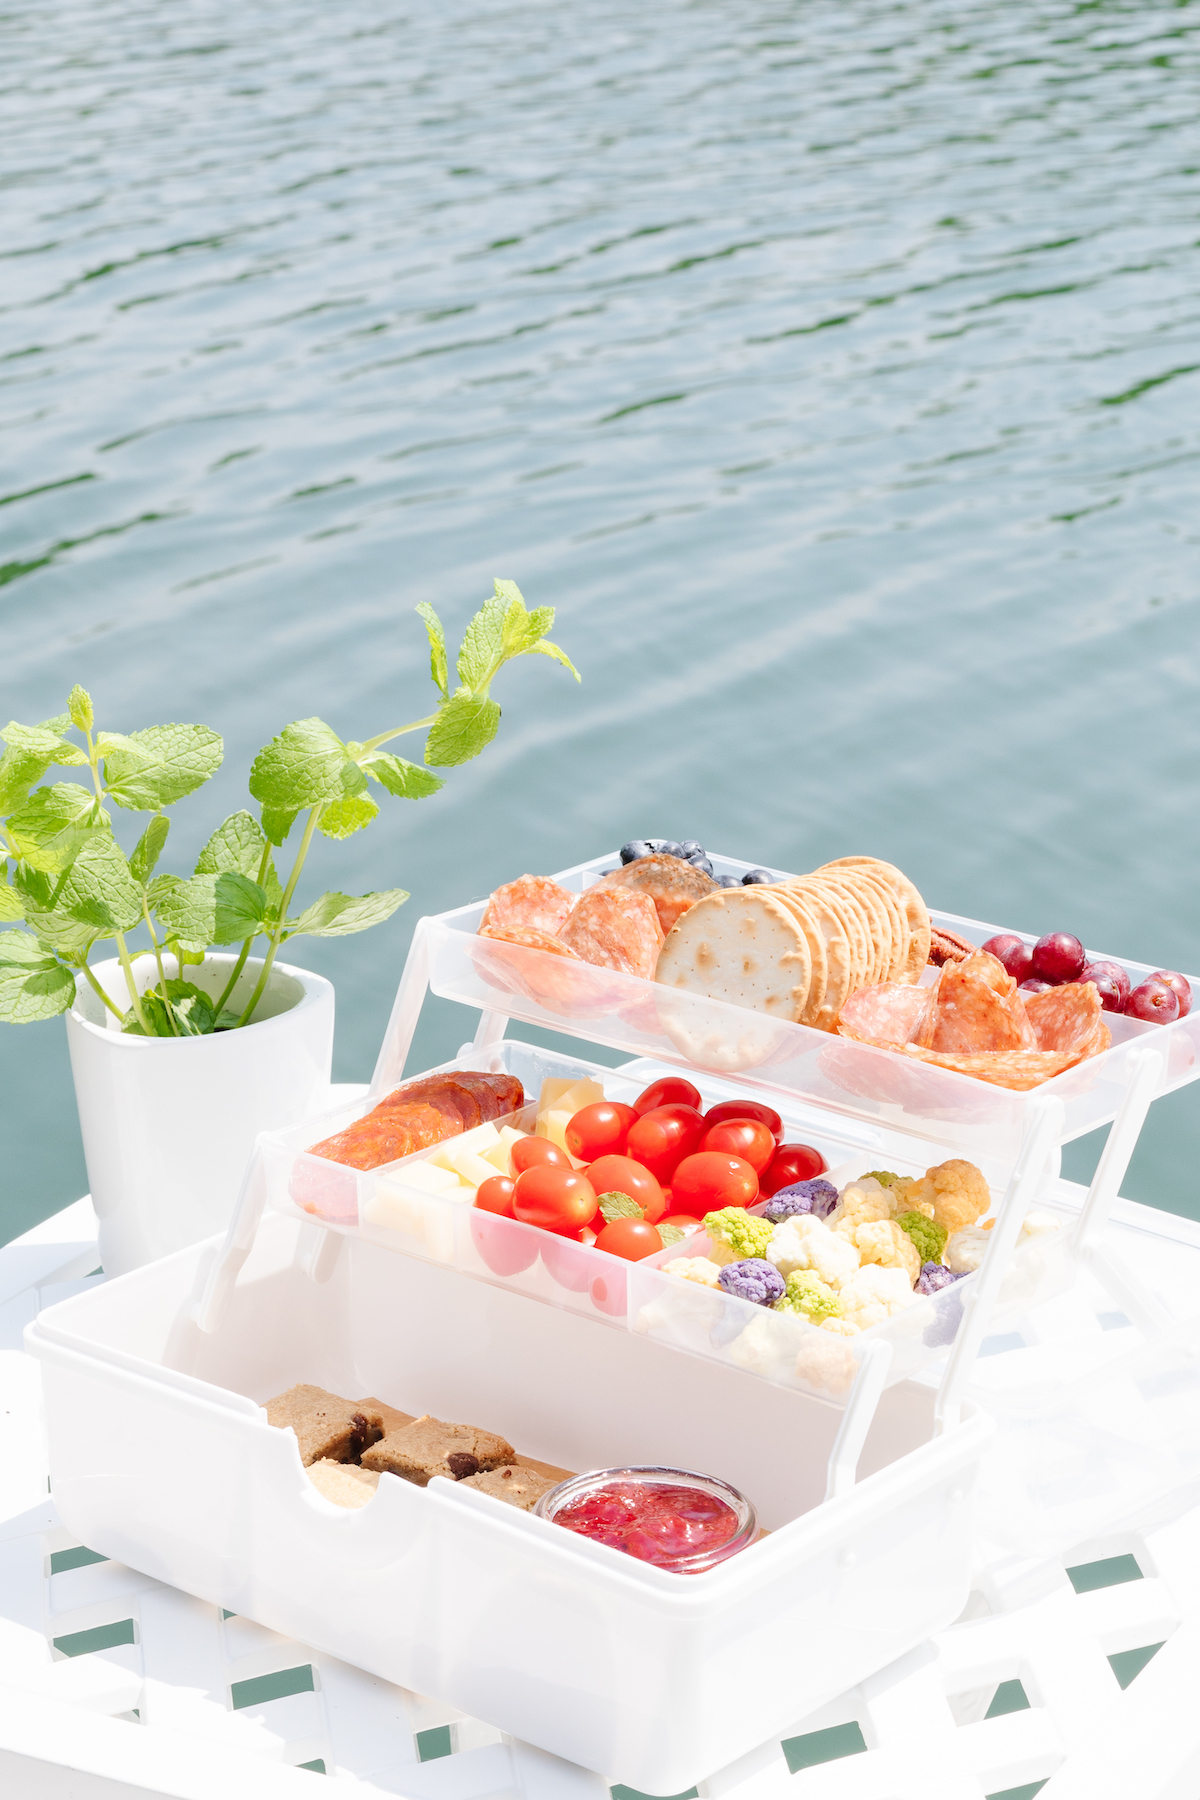 A snackle box on a white table with water in the background.